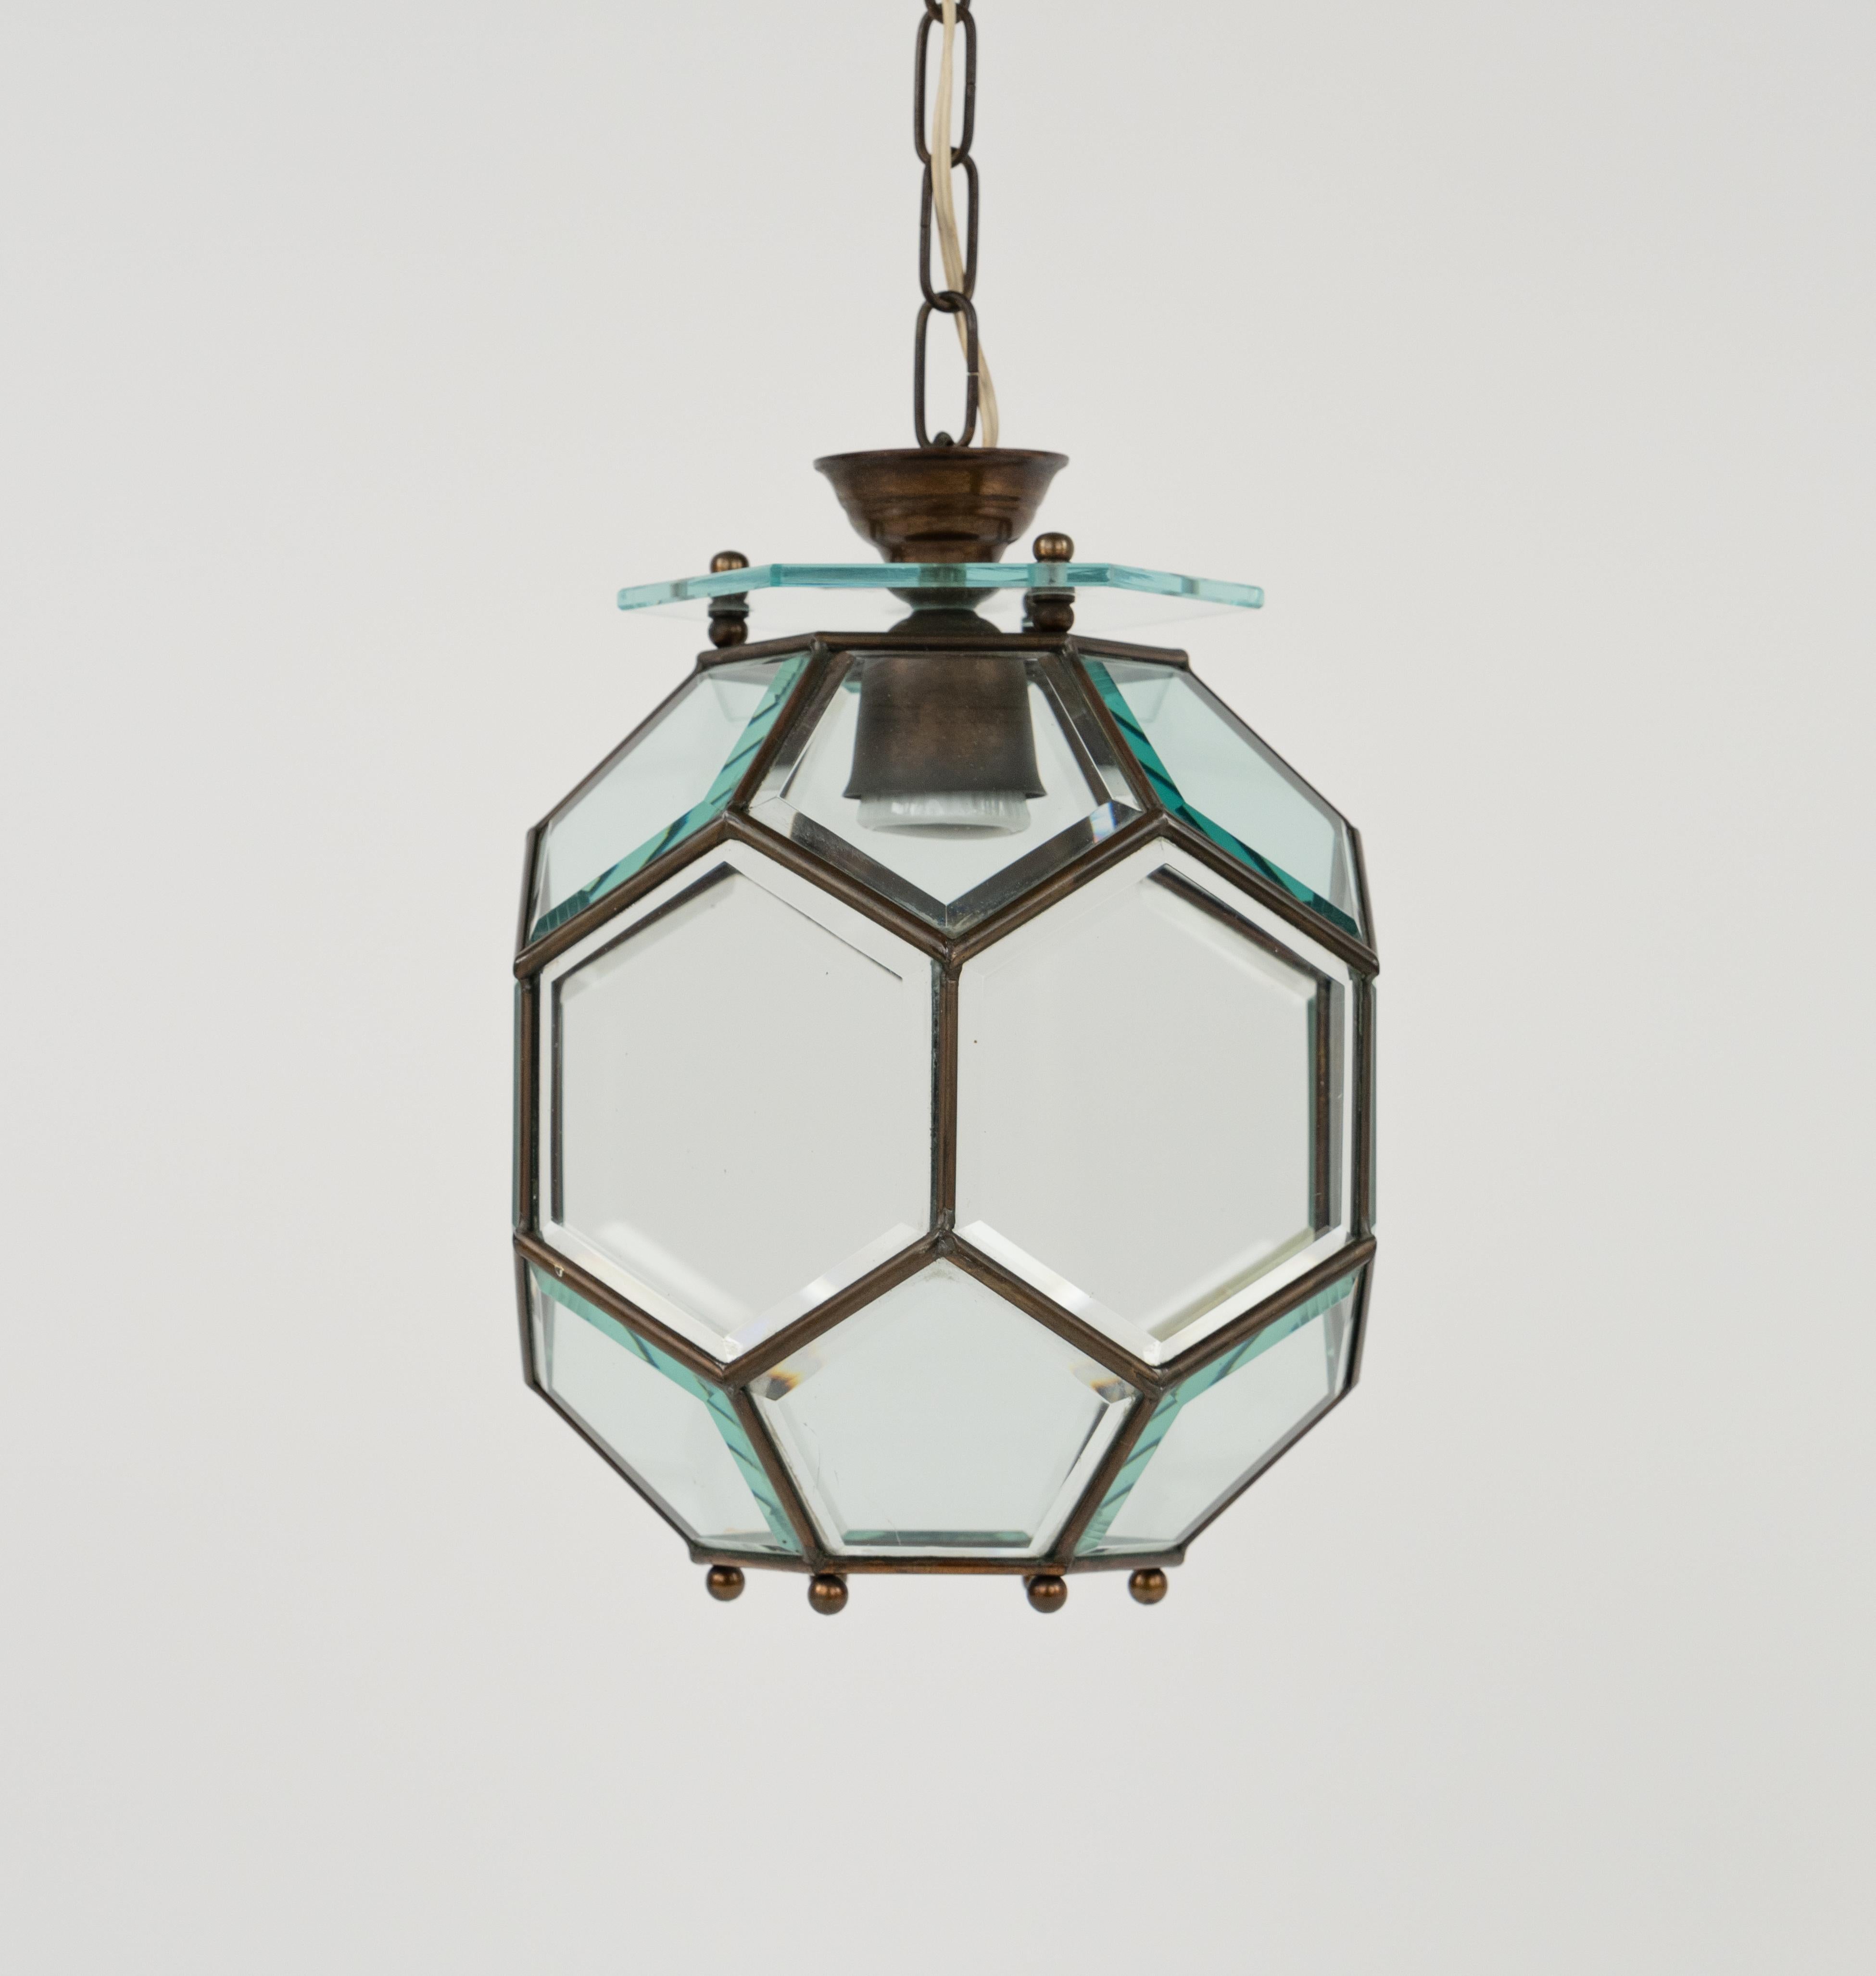 Italian Midcentury Chandelier in Brass and Beveled Glass Adolf Loos Style, Italy 1950s For Sale